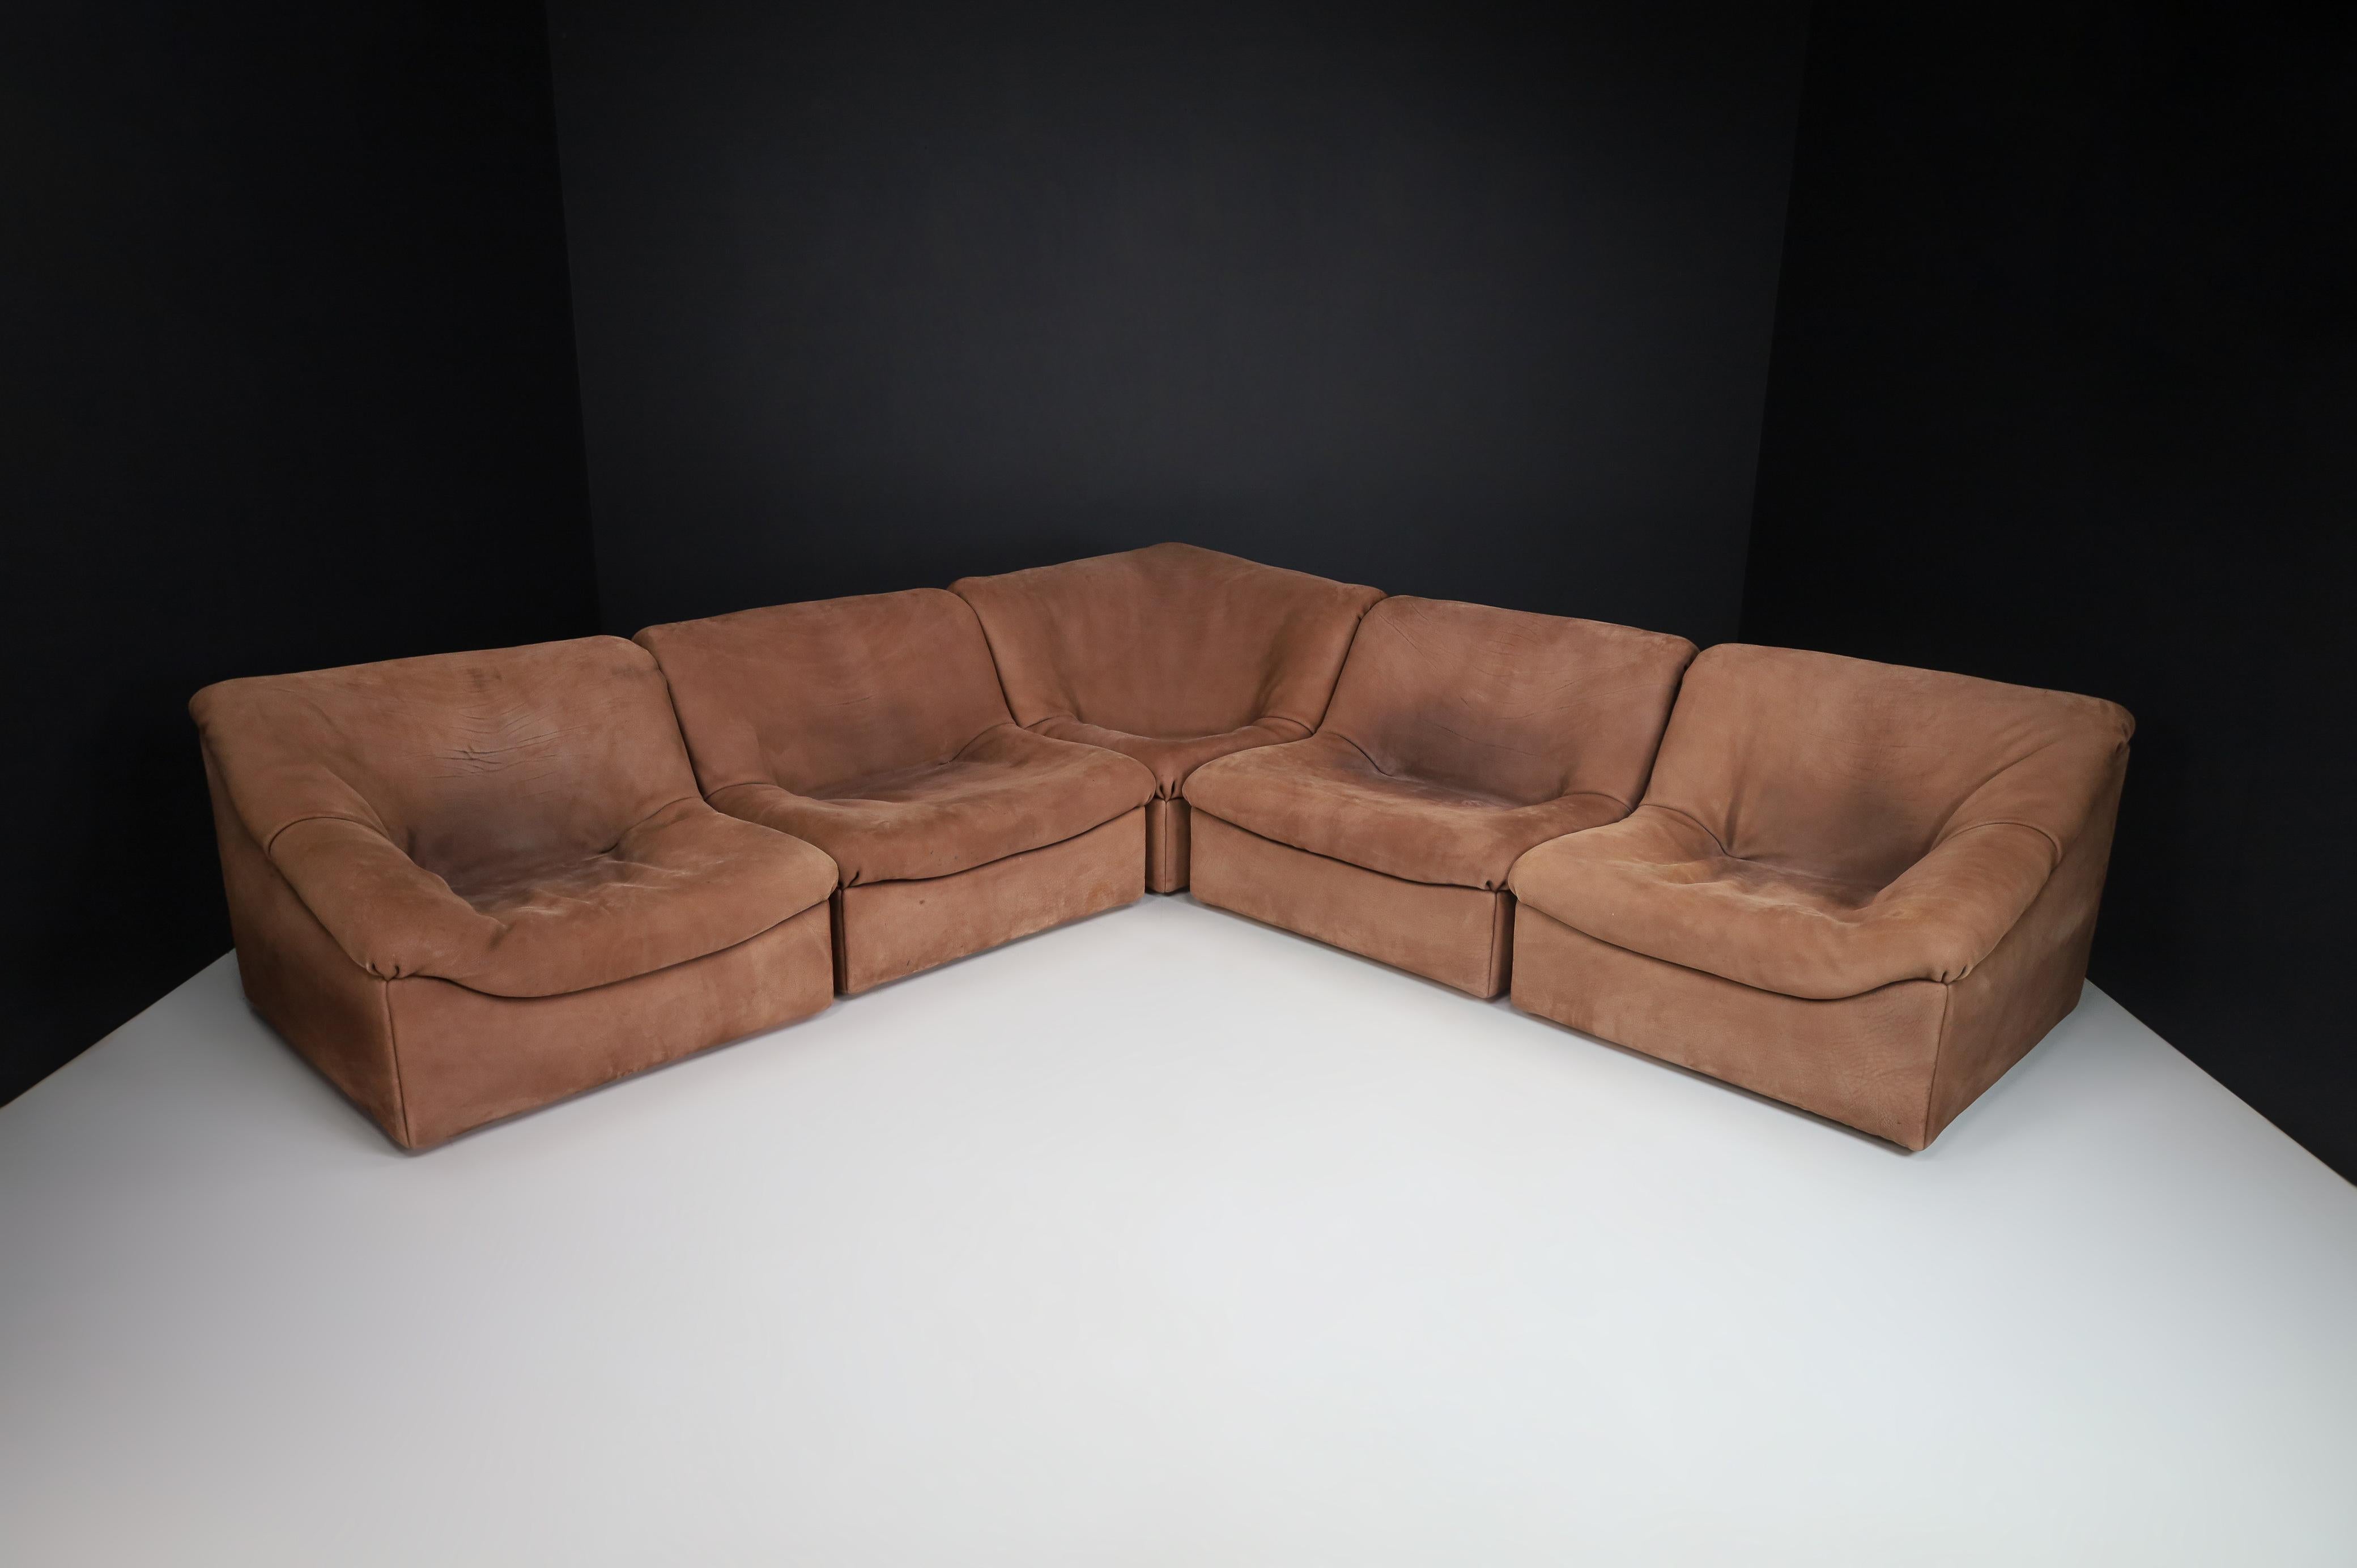 De Sede DS46 Sectional Sofa-Livingroomset in Buffalo Leather, Switzerland 1970s For Sale 11